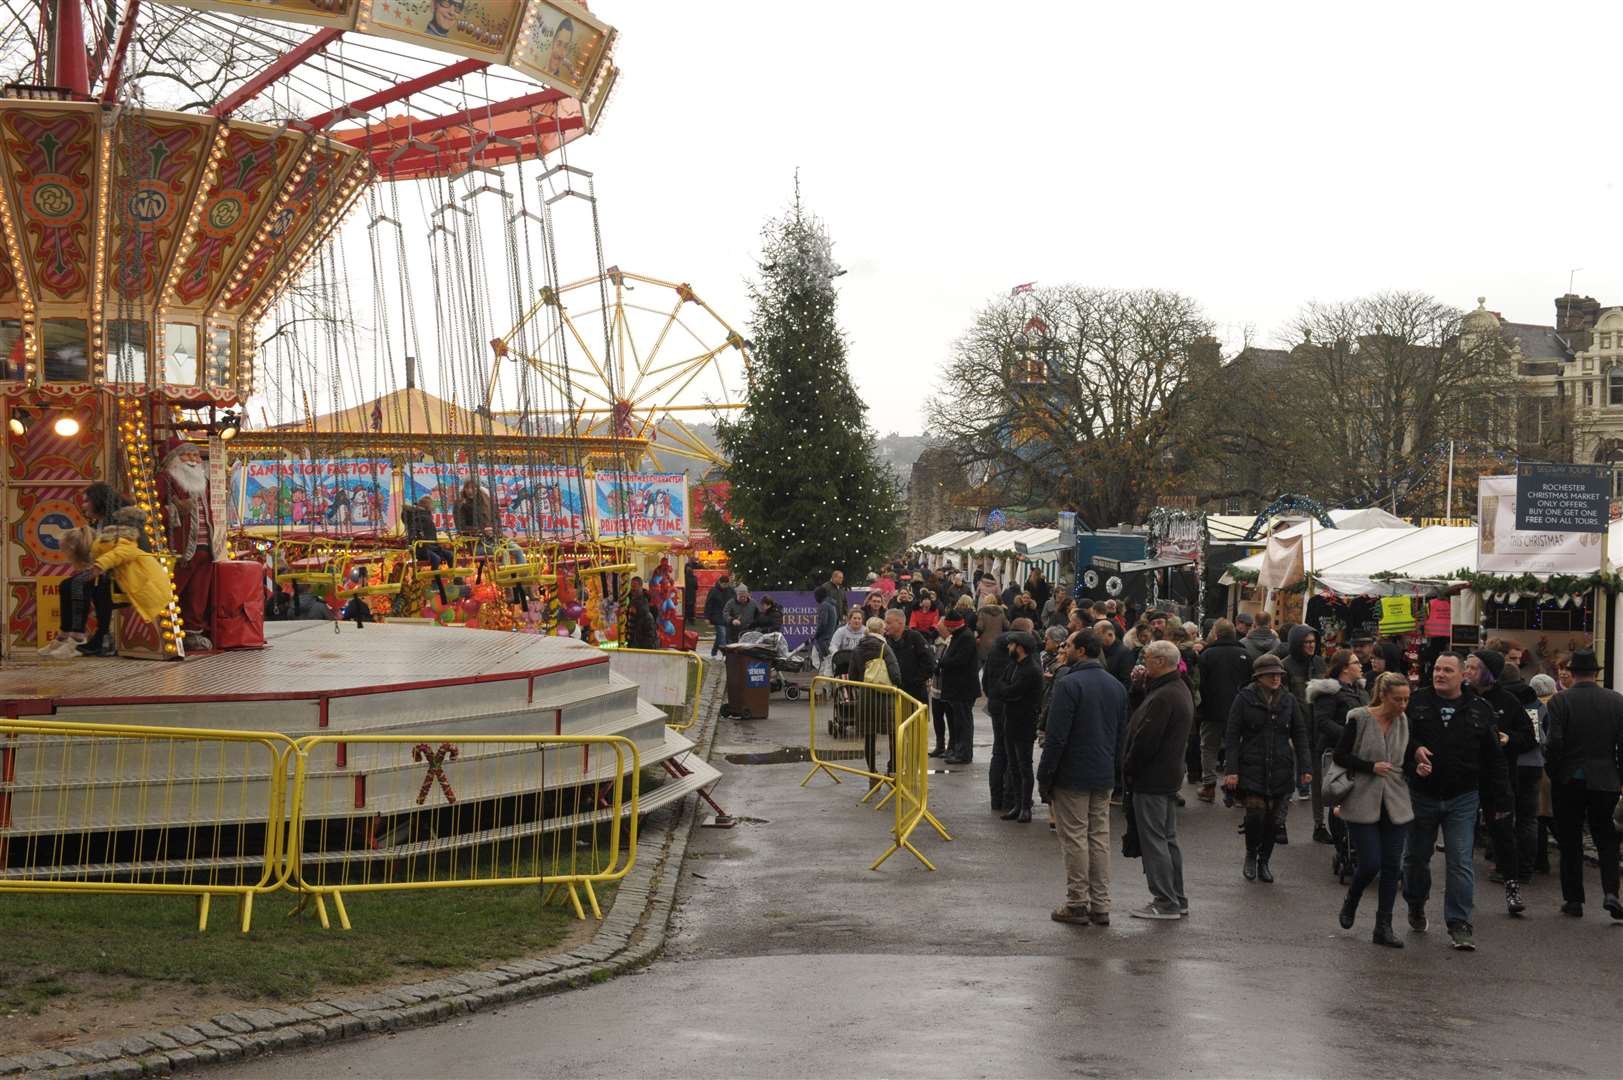 The fairground in Rochester